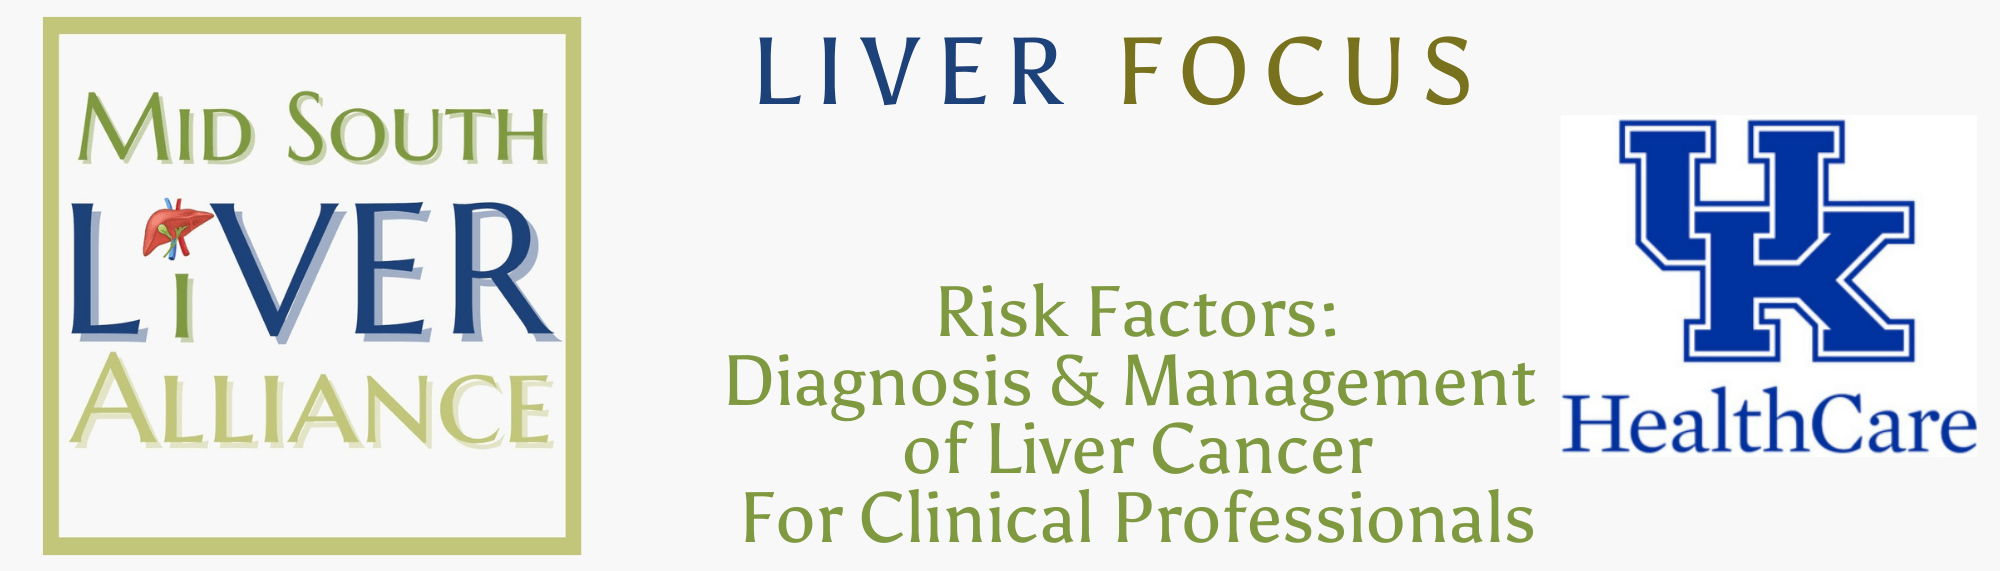 Liver Focus: Risk Factors: Diagnosis and Management of Liver Cancer for Clinical Professionals, includes logos for Mid South Liver Alliance and University of KY